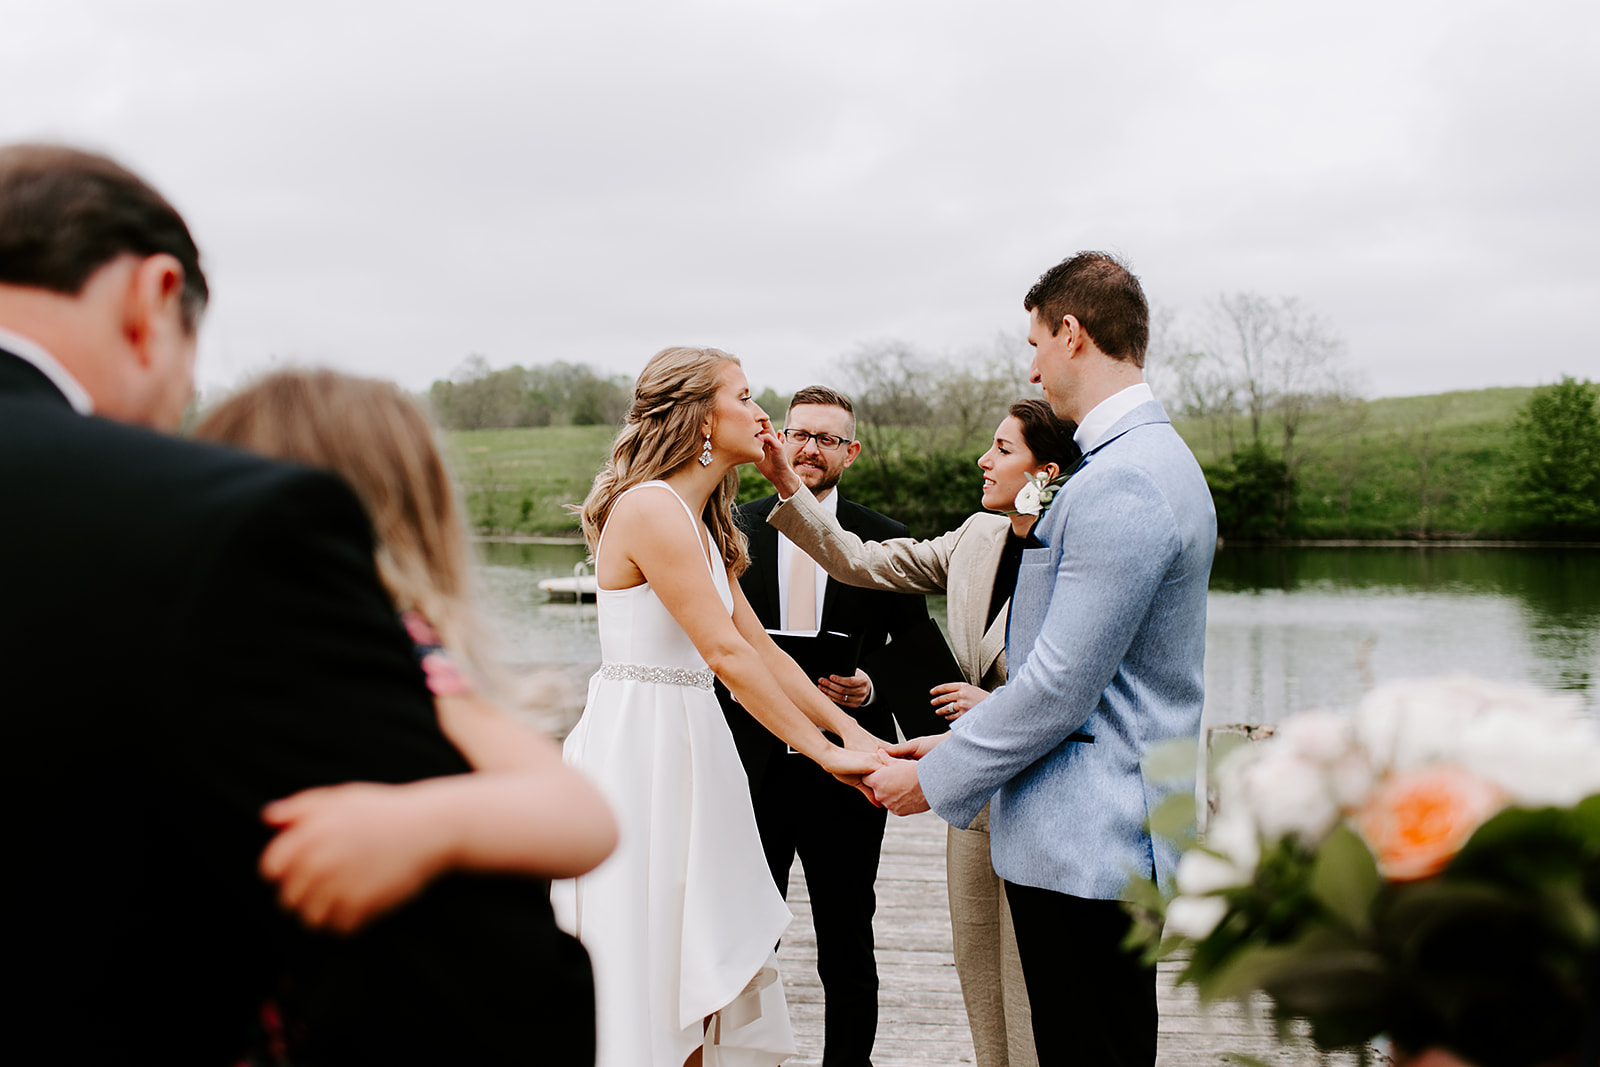 Traders Point Creamery Elopement in Zionsville, Indiana | Wedding vows, photography by Emily Wehner